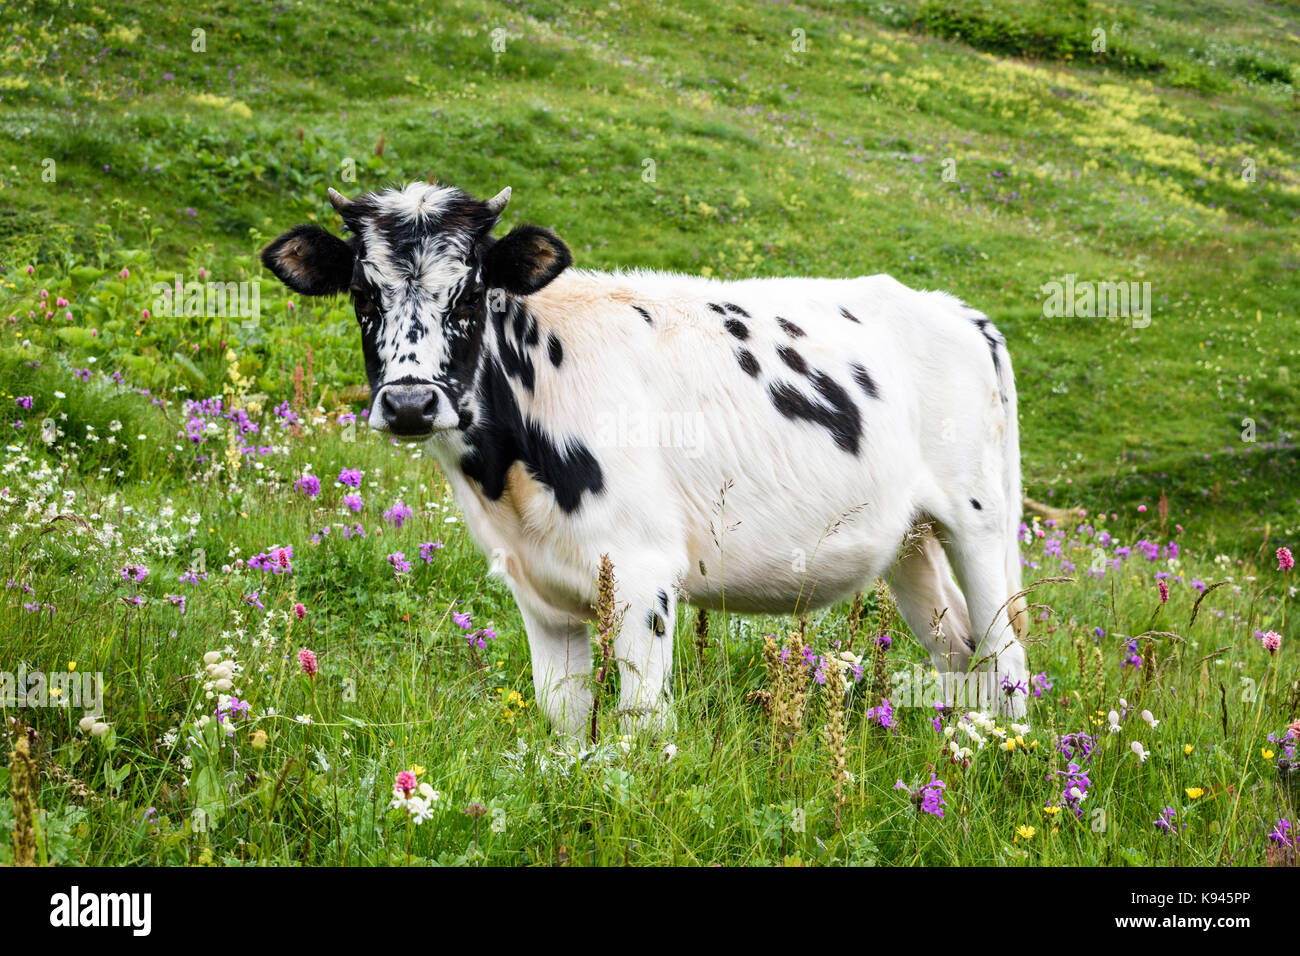 A cow with a white and black spotted hide standing in grassland, meadow pasture with wildflowers, Georgia. Stock Photo